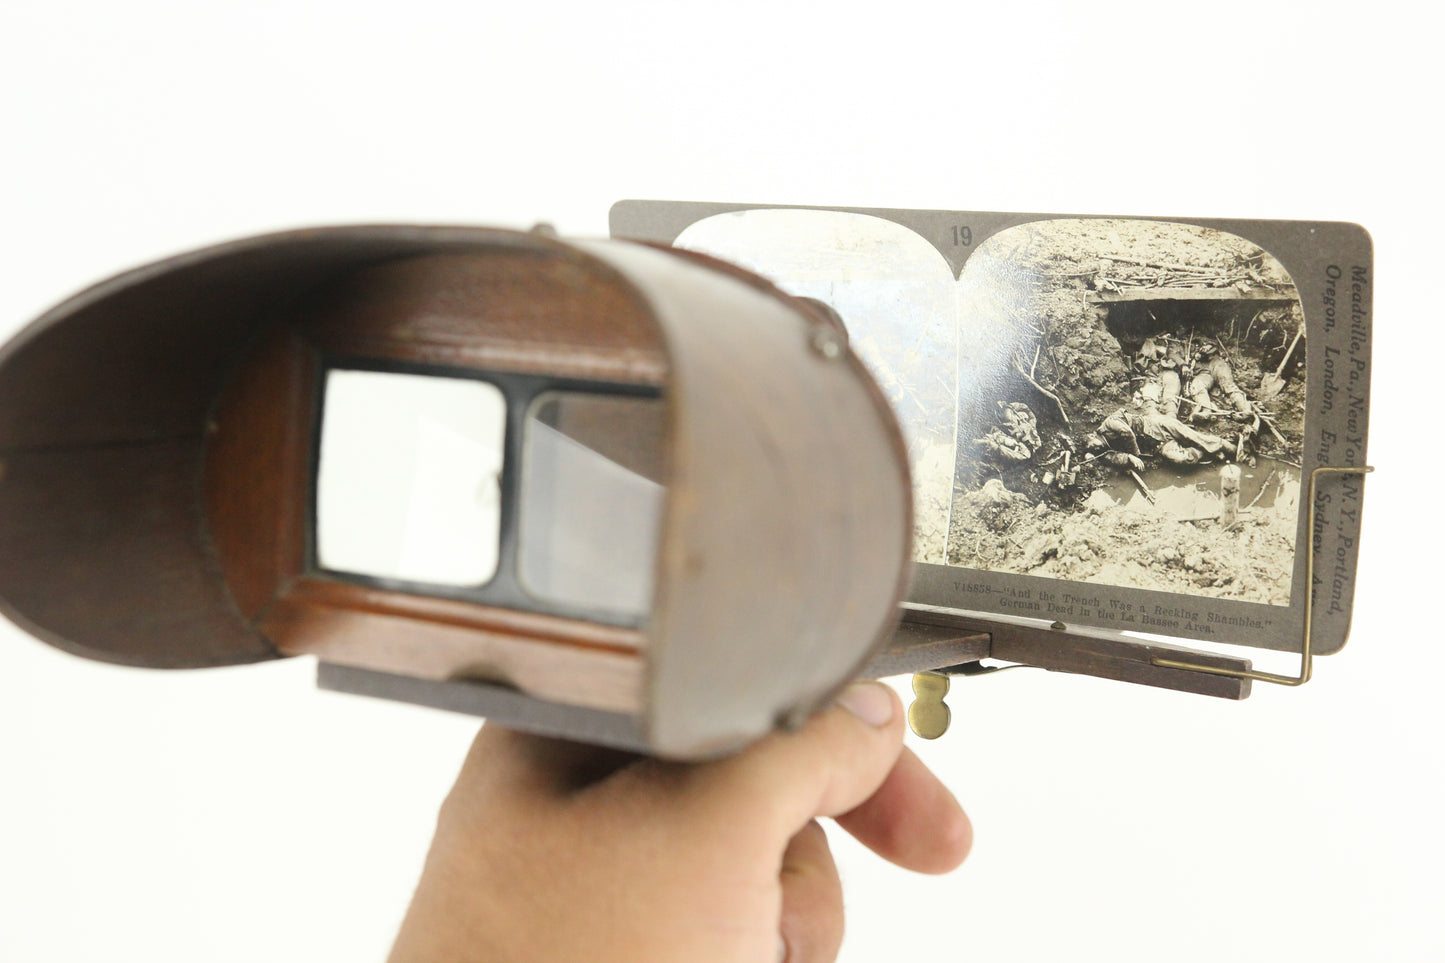 Stereoscope 3D Viewfinder Stereo Card Viewer by H. Ropes & Co., New York